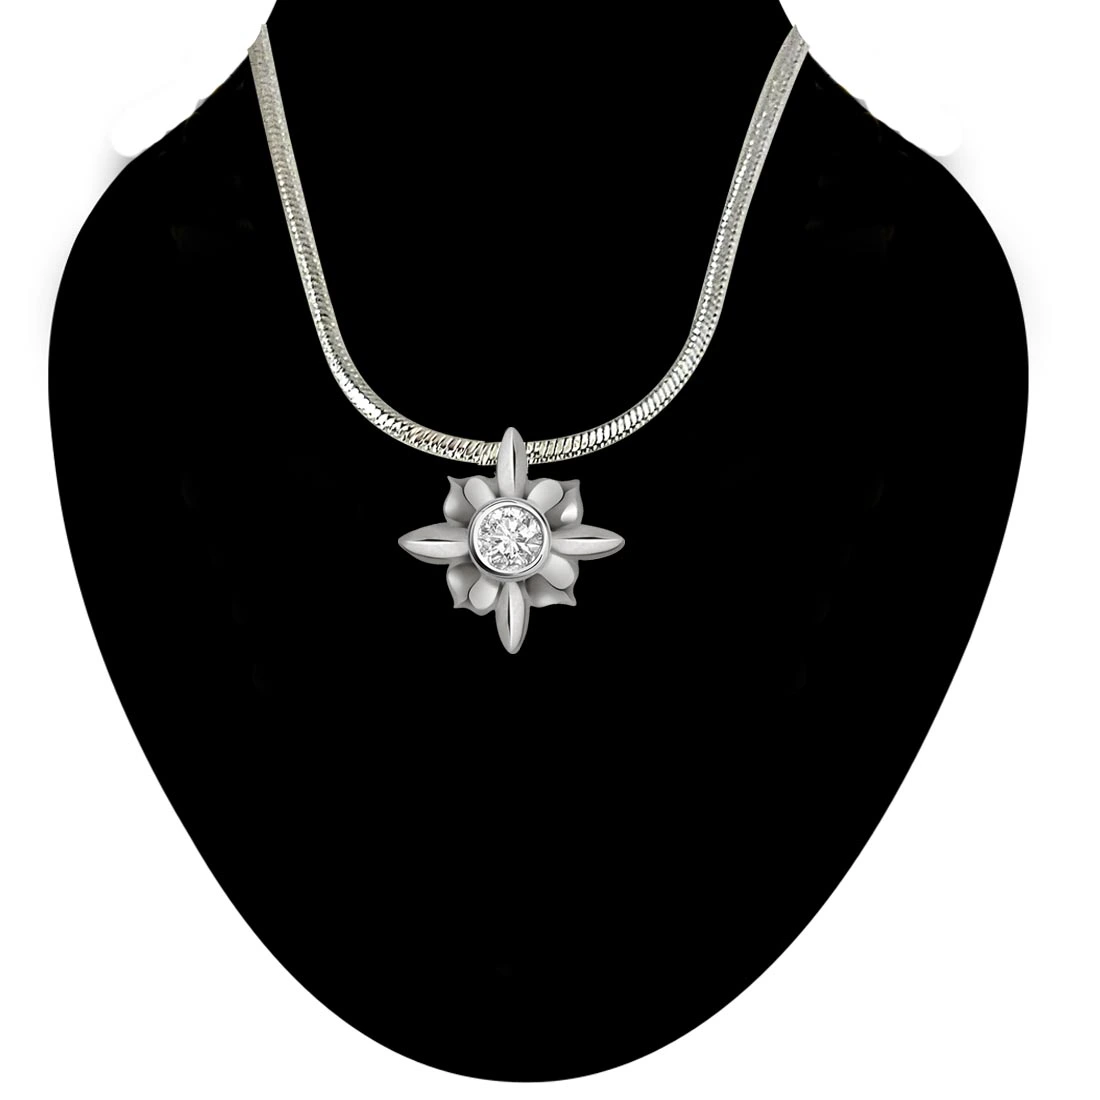 Clusters of Stars - Real Diamond & Sterling Silver Pendant with 18 IN Chain (SDP164)